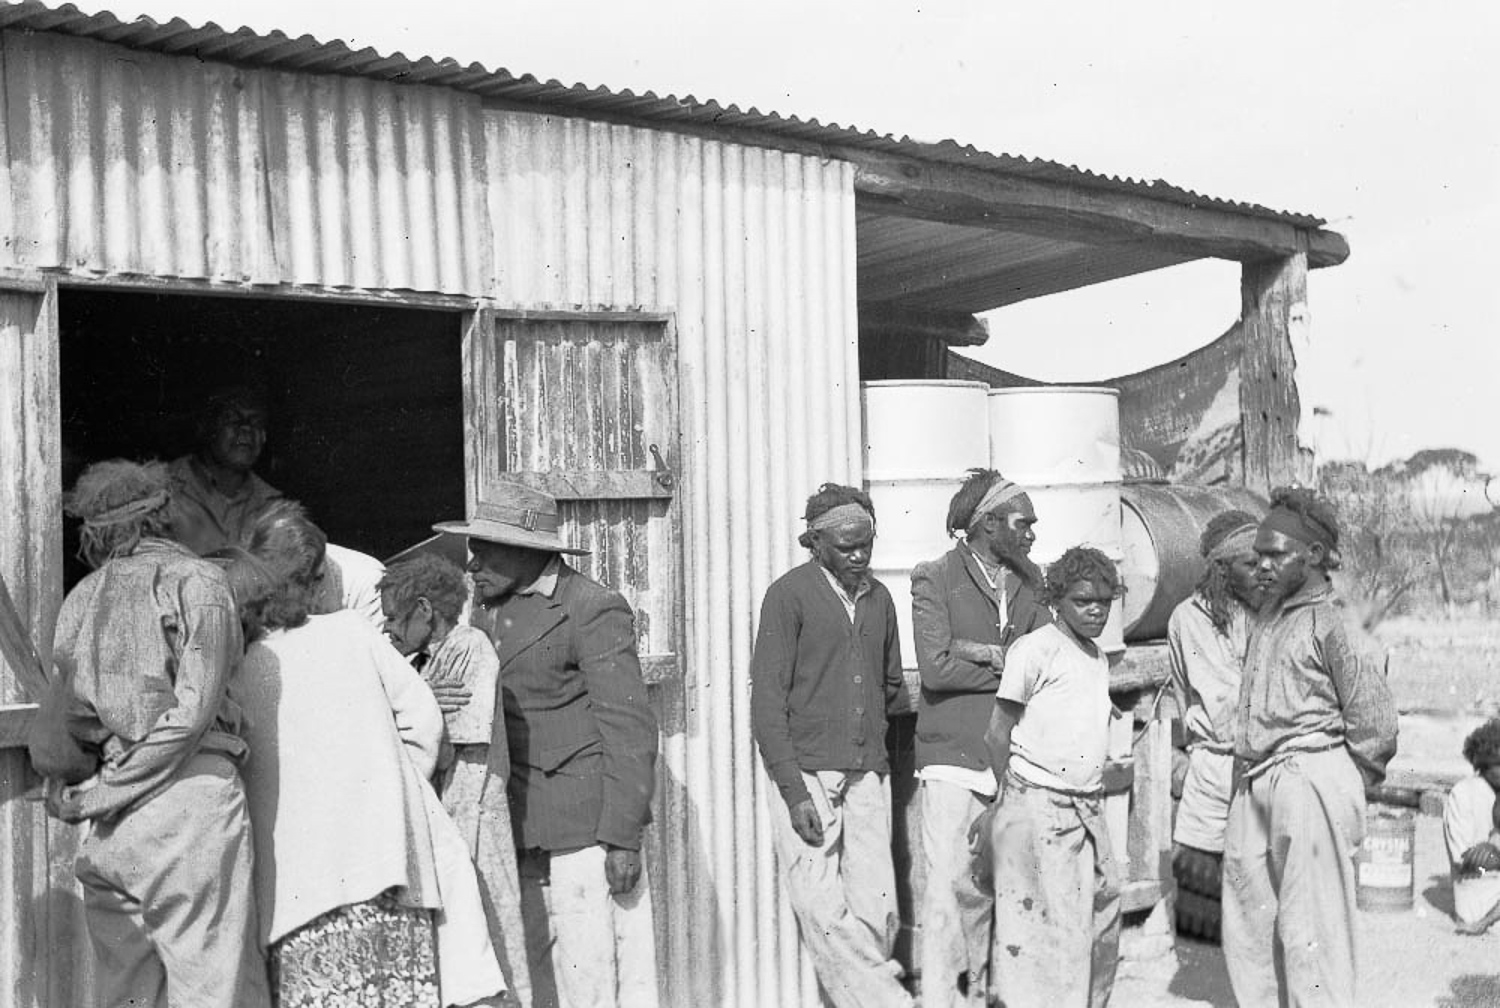 Jack Jamieson, Albert Jamieson, Frank Hogan, Arthur Jamieson and Bill Jamieson stand huddled together on the right, newcomers to the mission at Cundeelee. While the forced relocation of Anangu saw them dislocated from their homelands, descendants are grateful to the trackers who located them, as they were saved from potential disaster from the nuclear testing and a prolonged draught in Spinifex Country.